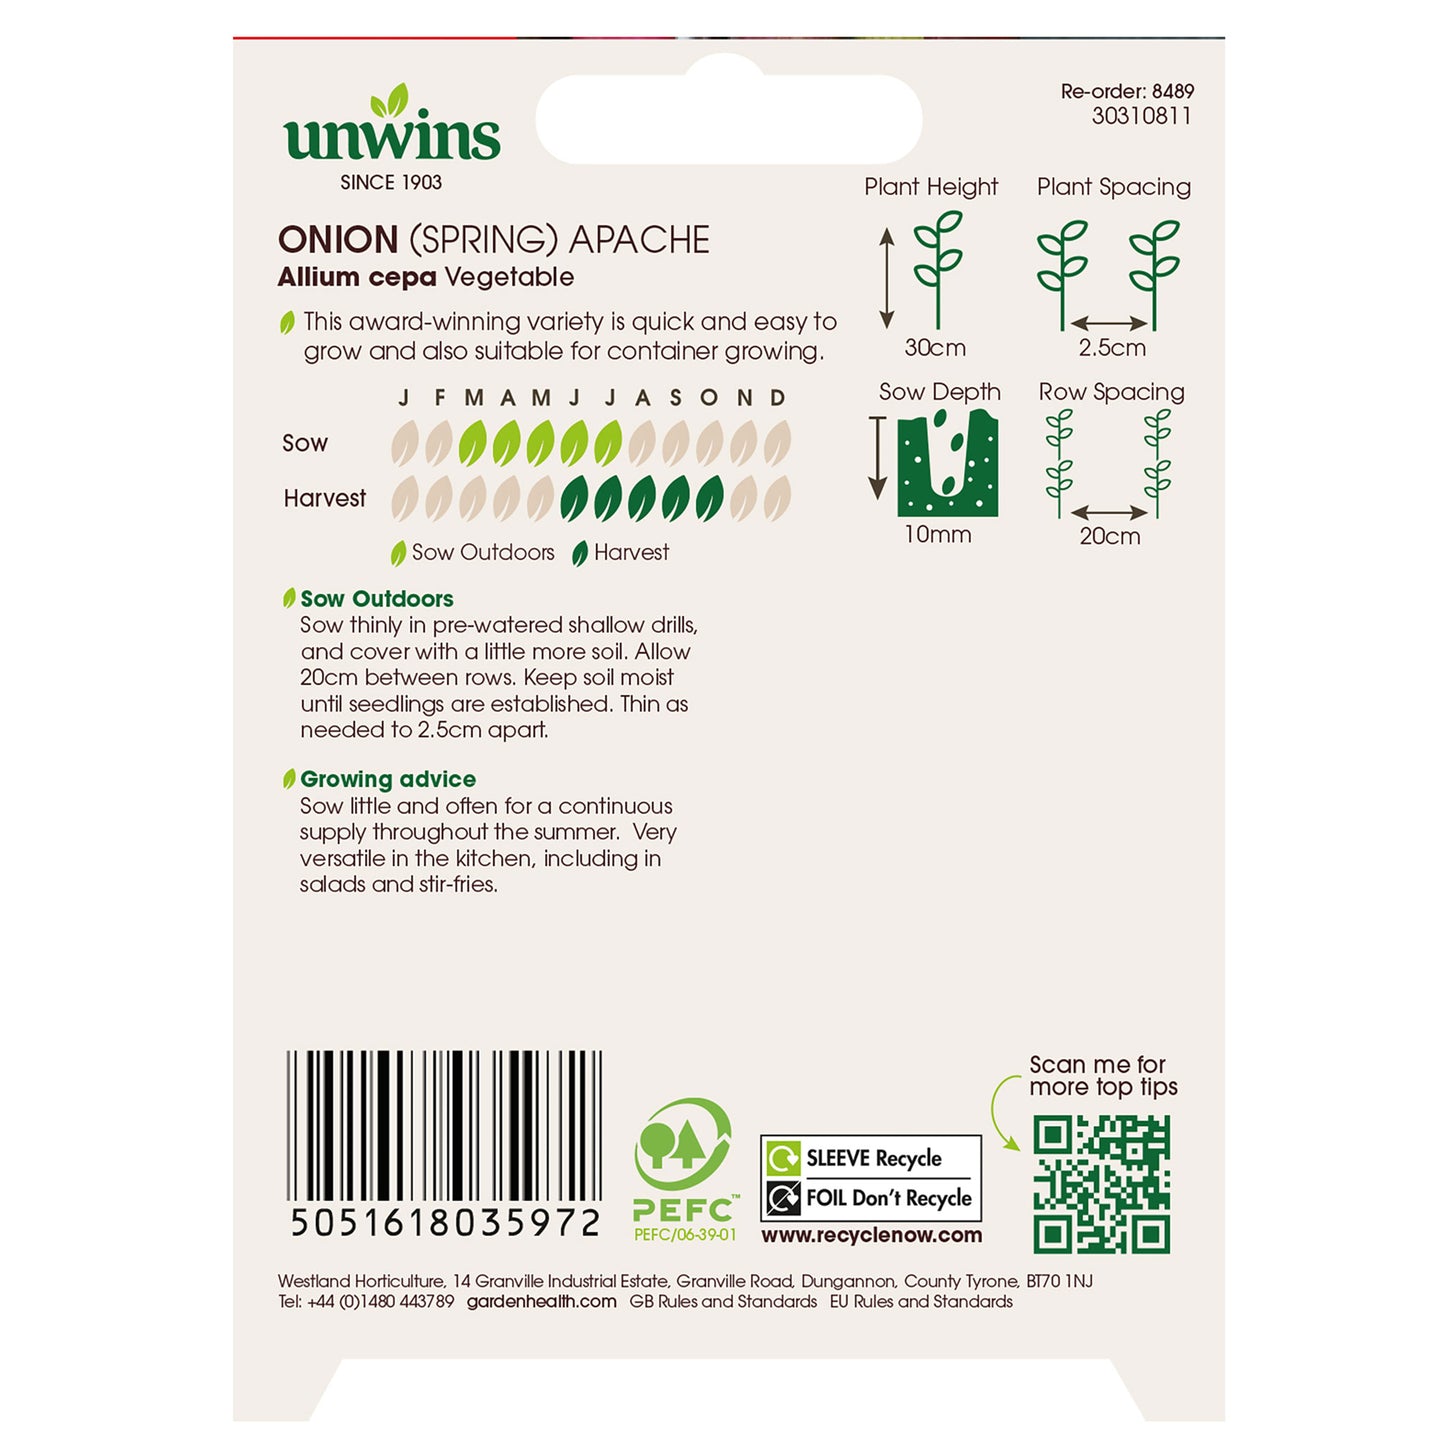 Unwins Spring Onion Apache Seeds back of pack